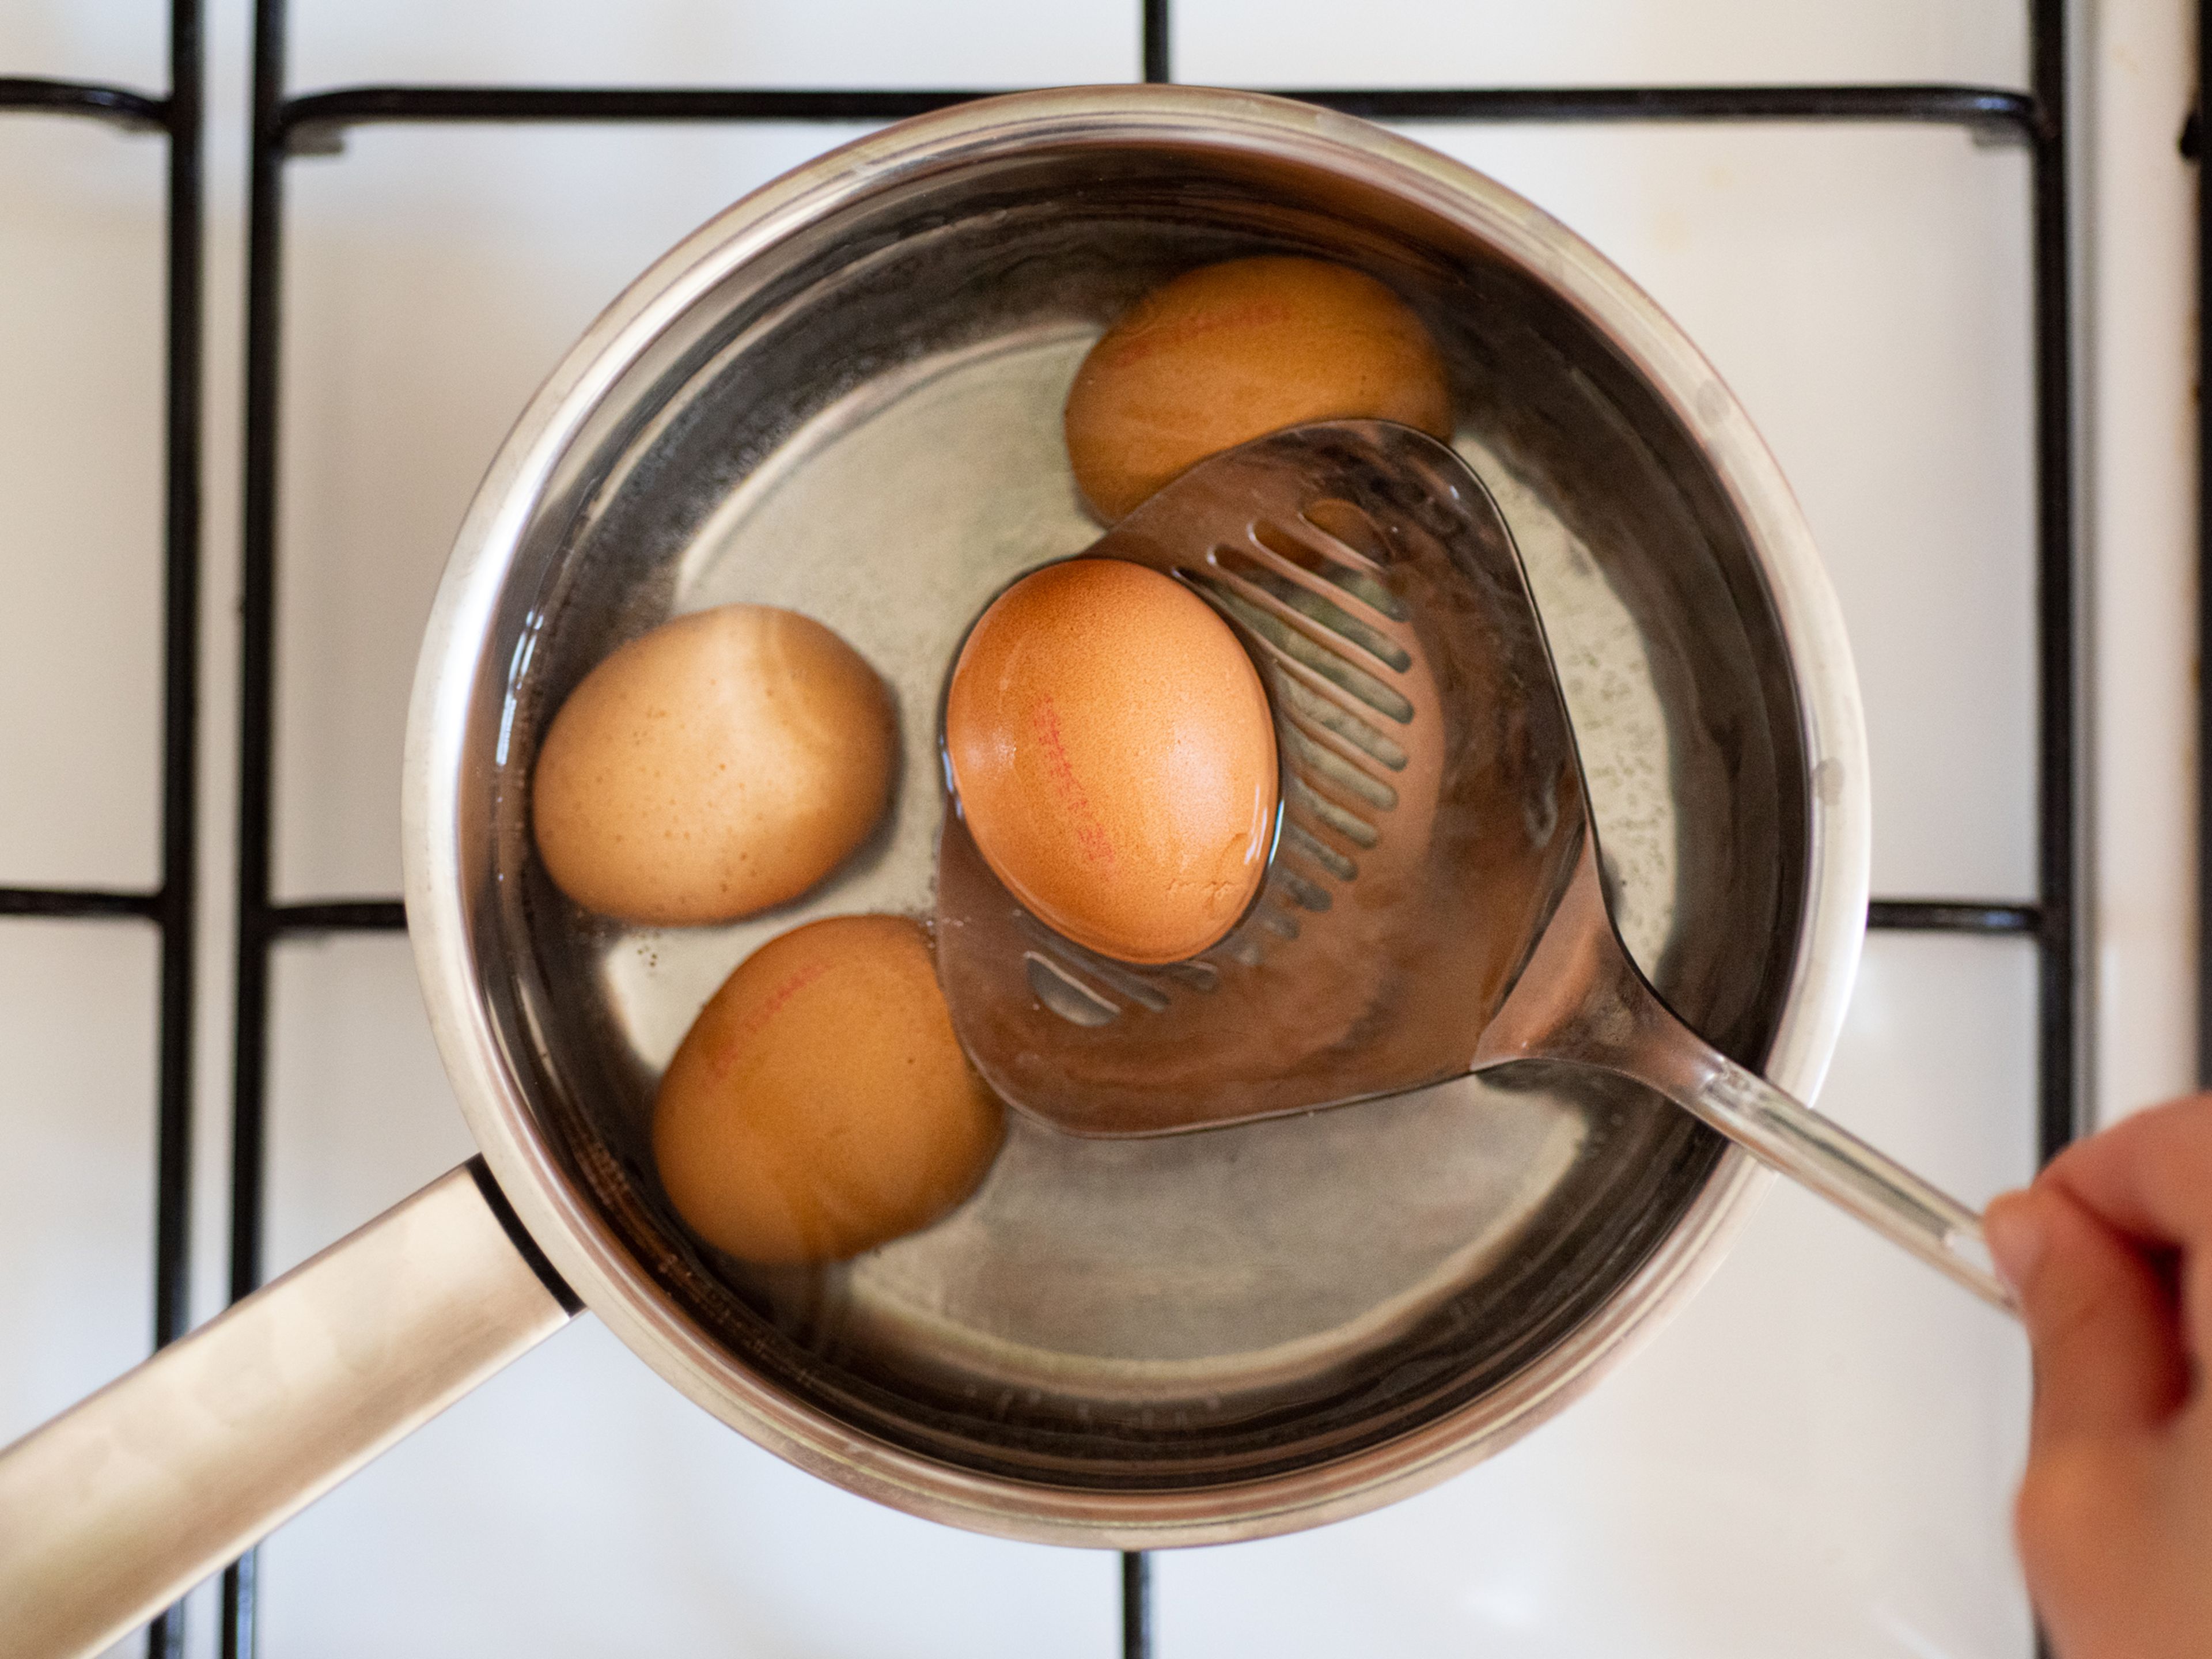 In the meantime, bring a large pot of water to a boil over medium-high heat. Once boiling, add eggs. Boil for approx. 7 - 8 min., then remove and run under cold running water. Once cool enough to handle, peel, break or slice in half, and set aside.